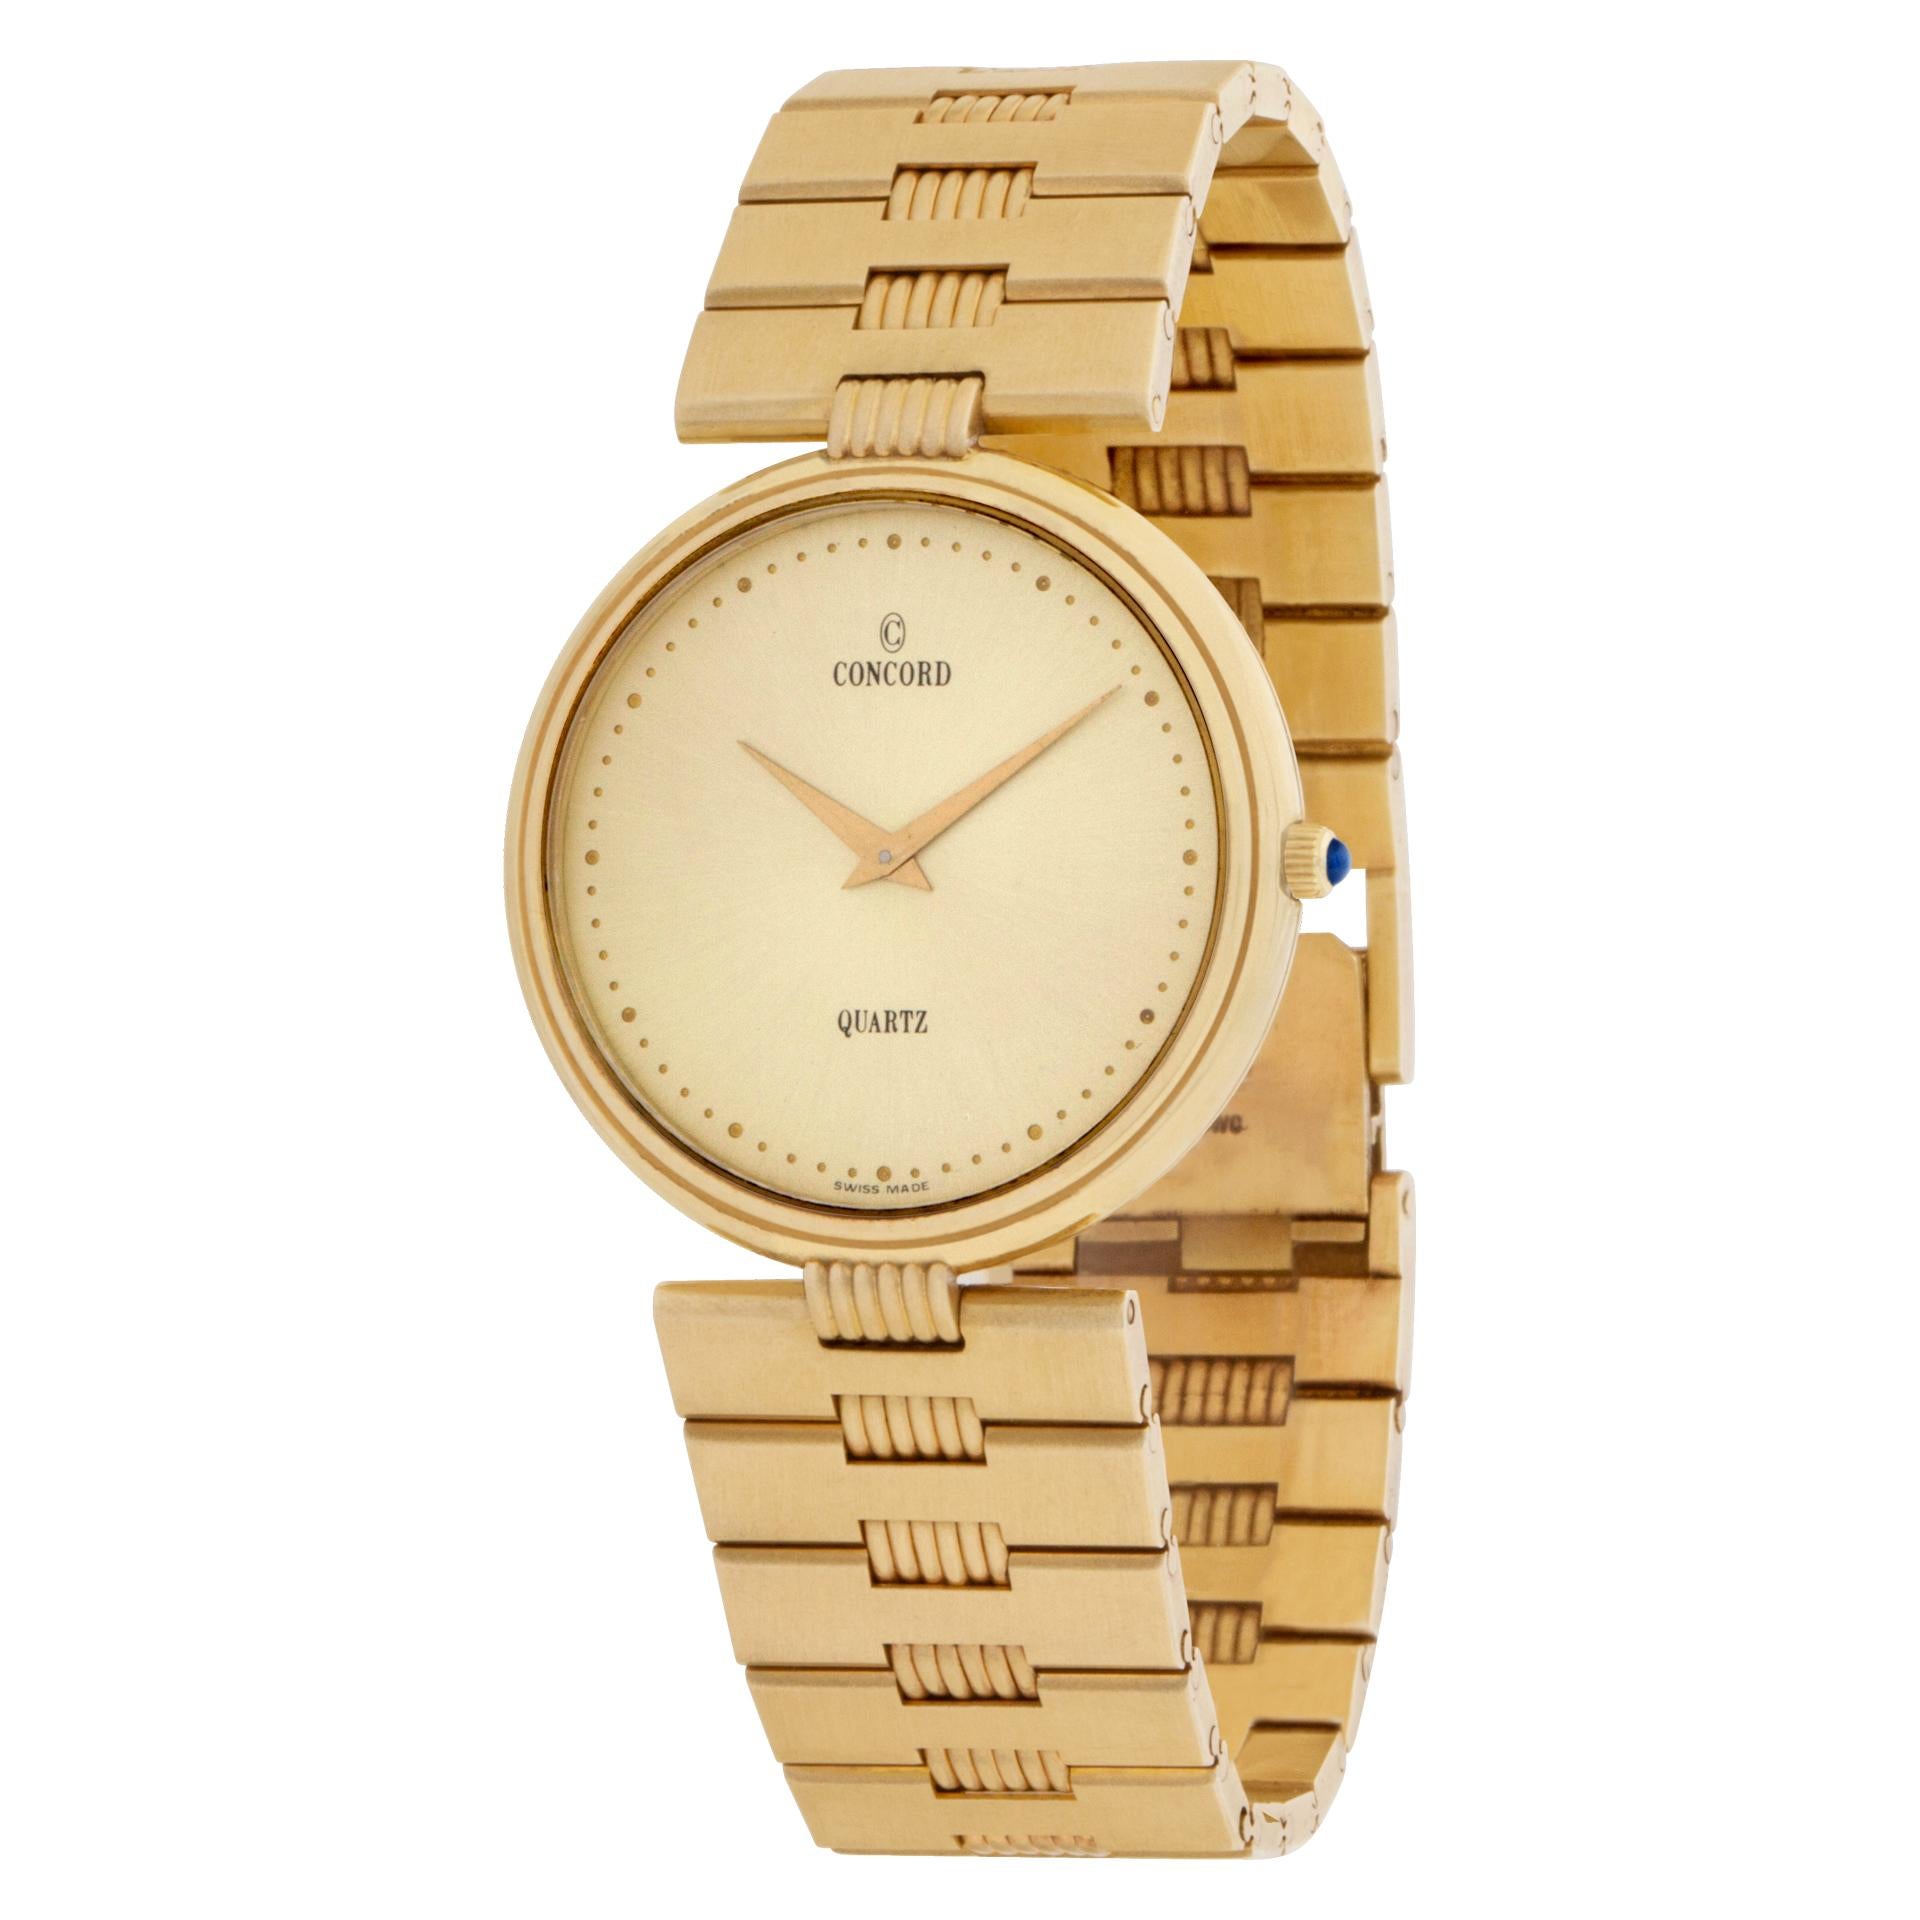 Concord Classic quartz watch in 14k with a champagne dial on 14k link bracelet. 34 mm case size. Fit for a 7.5'' wrist. Ref 2081215. Fine Pre-owned Concord Watch.  Certified preowned Classic Concord 2081215 watch is made out of yellow gold on a 14k